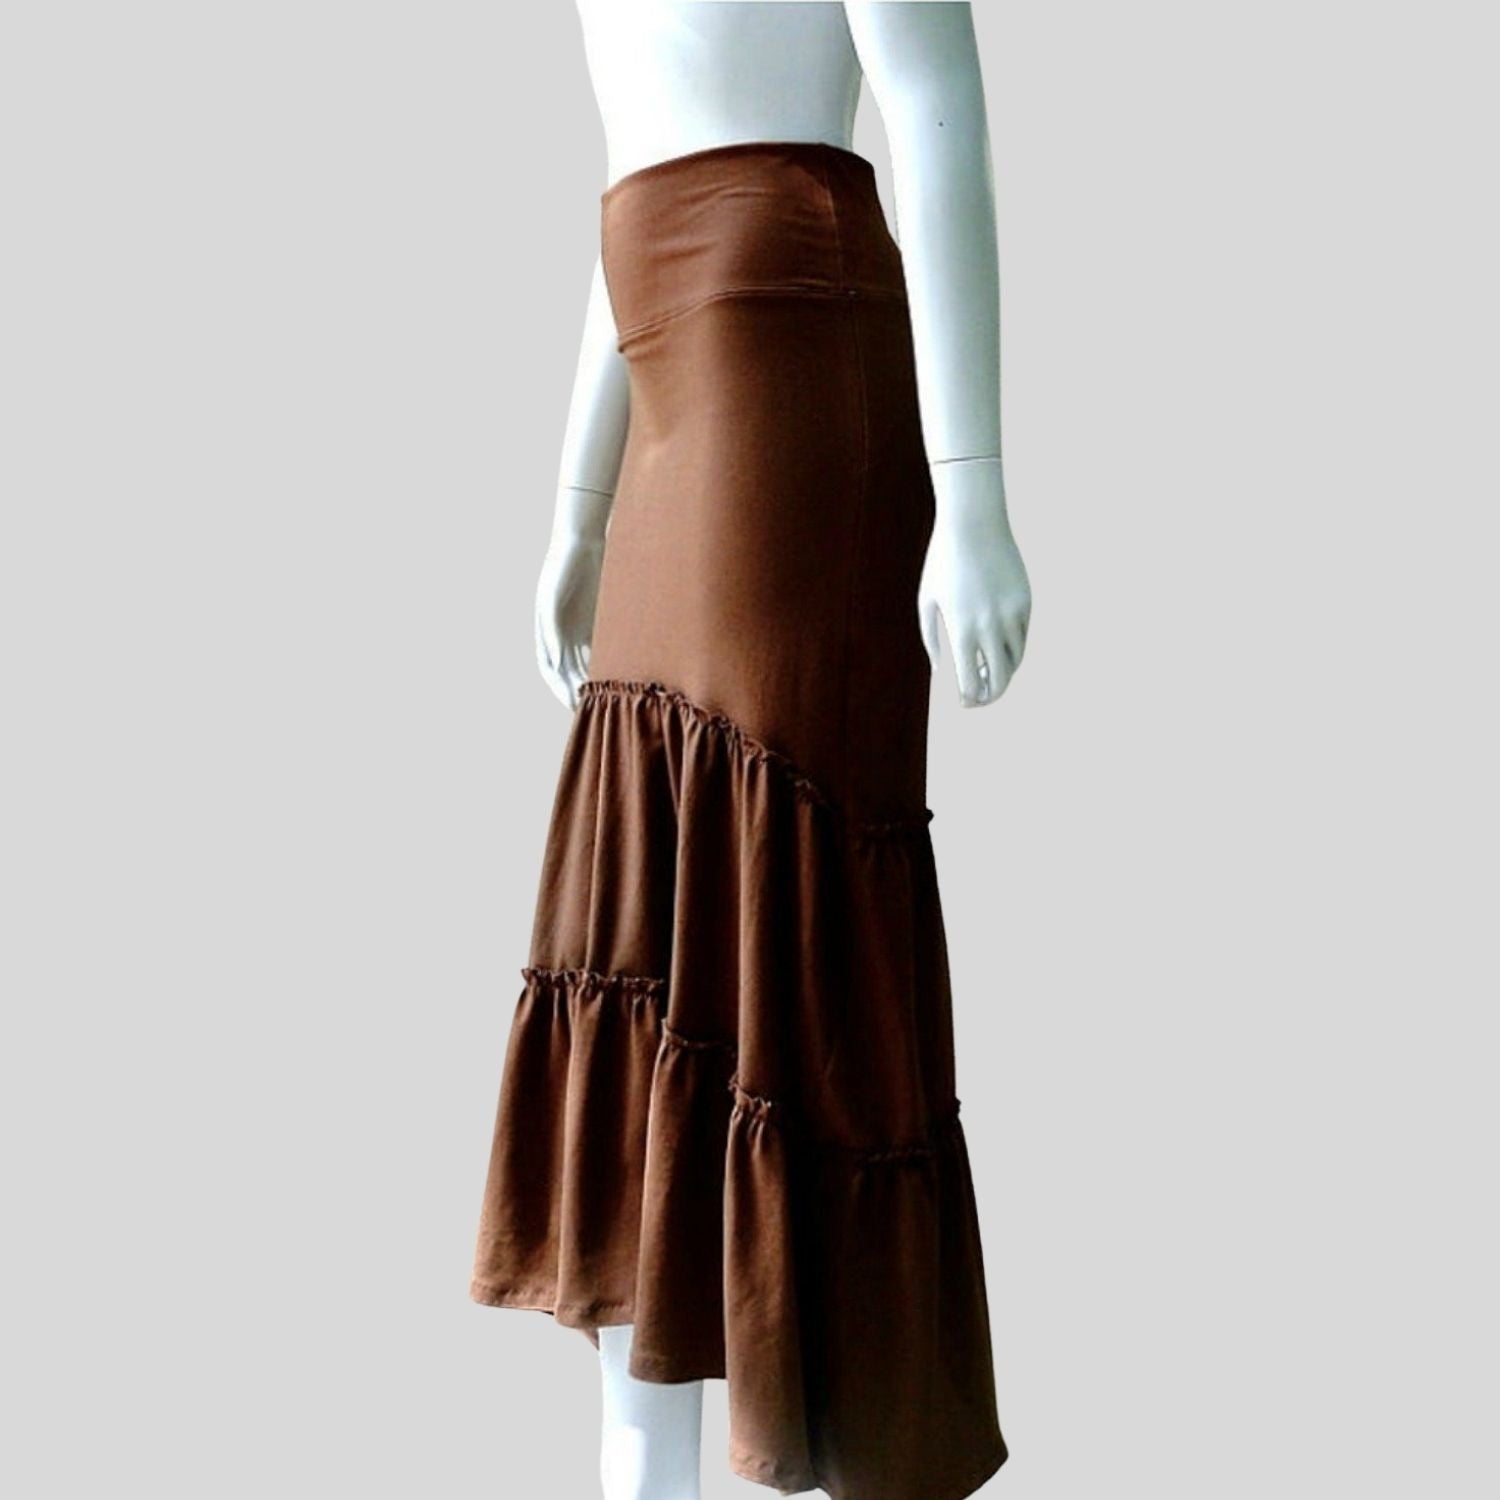 Brown Fit and flare skirt Canada | Shop maxi summer skirts made in Canada | Econica organic women's clothing shop 